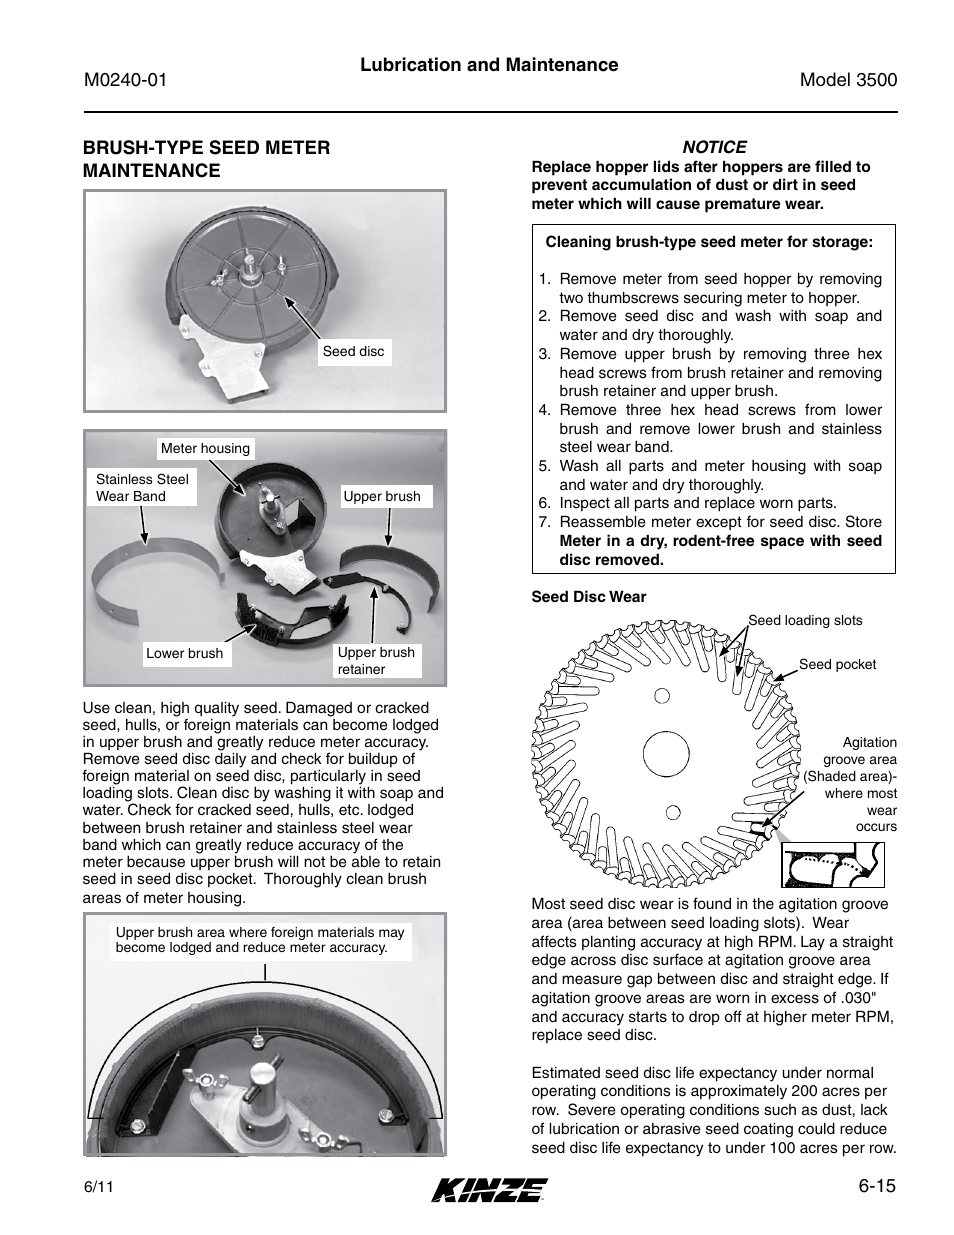 Kinze 3500 Lift and Rotate Planter Rev. 7/14 User Manual | Page 111 / 140